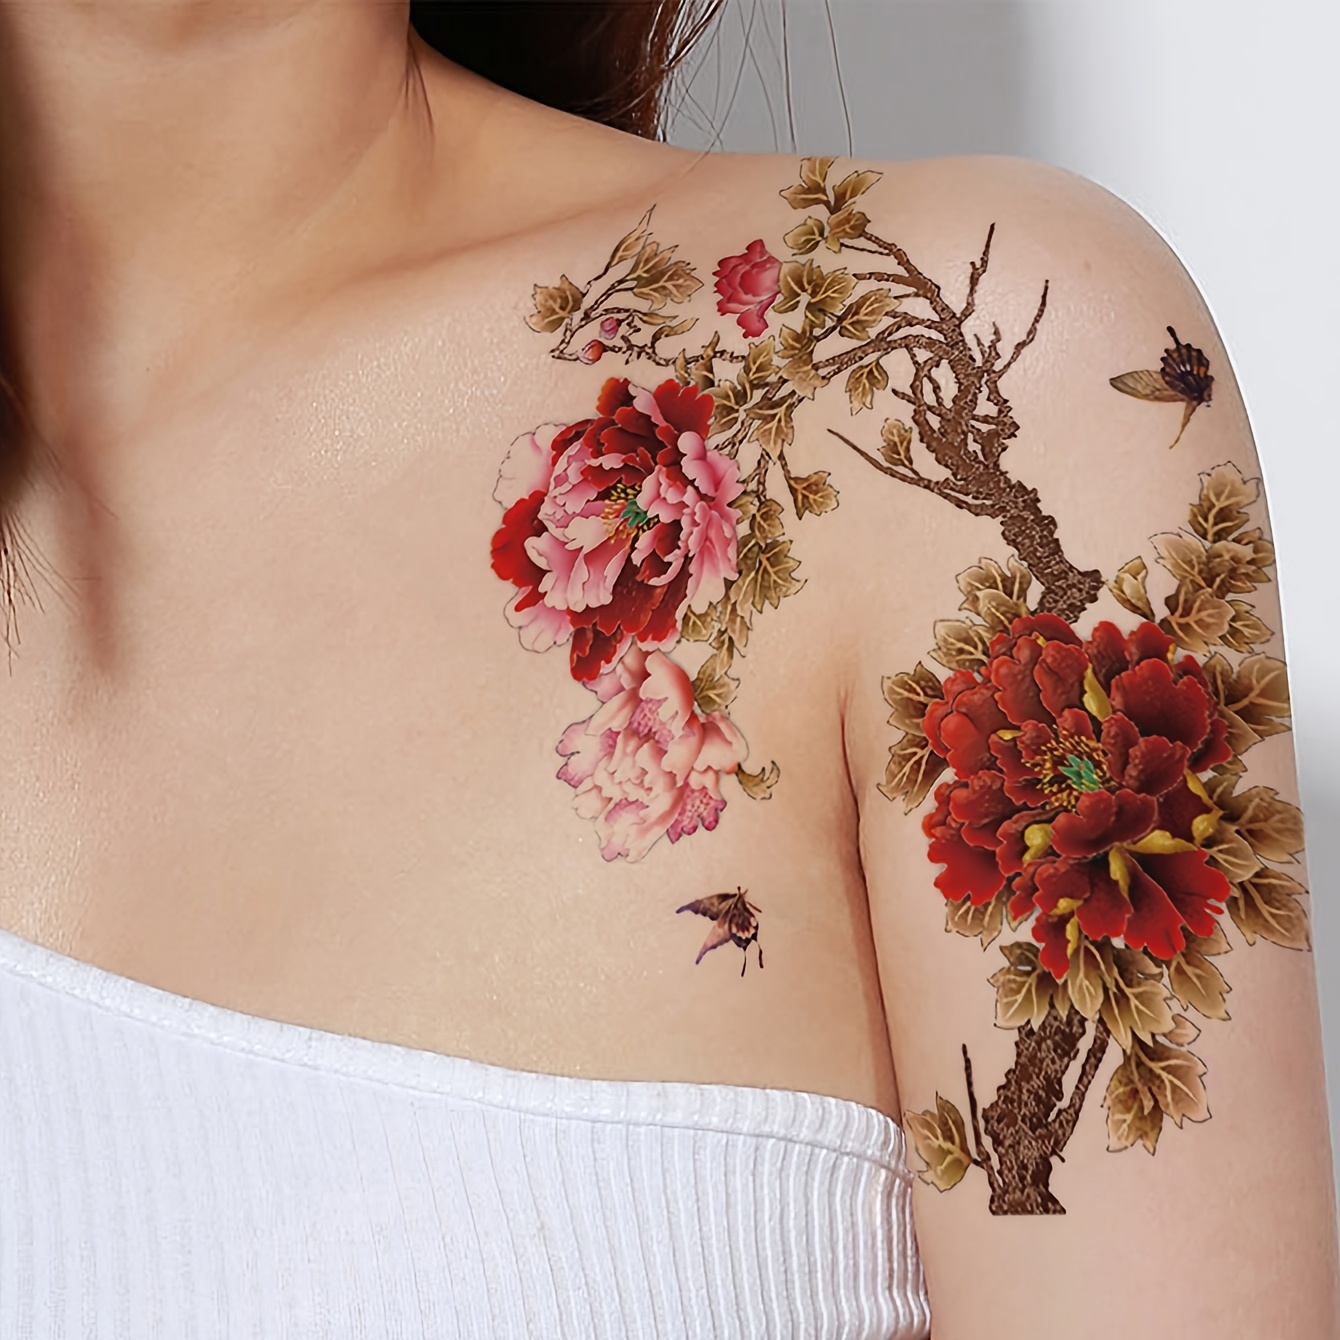 5 Sheets Arm Waterproof Temporary Tattoo with Peony Flower Design | Free Shipping & Returns